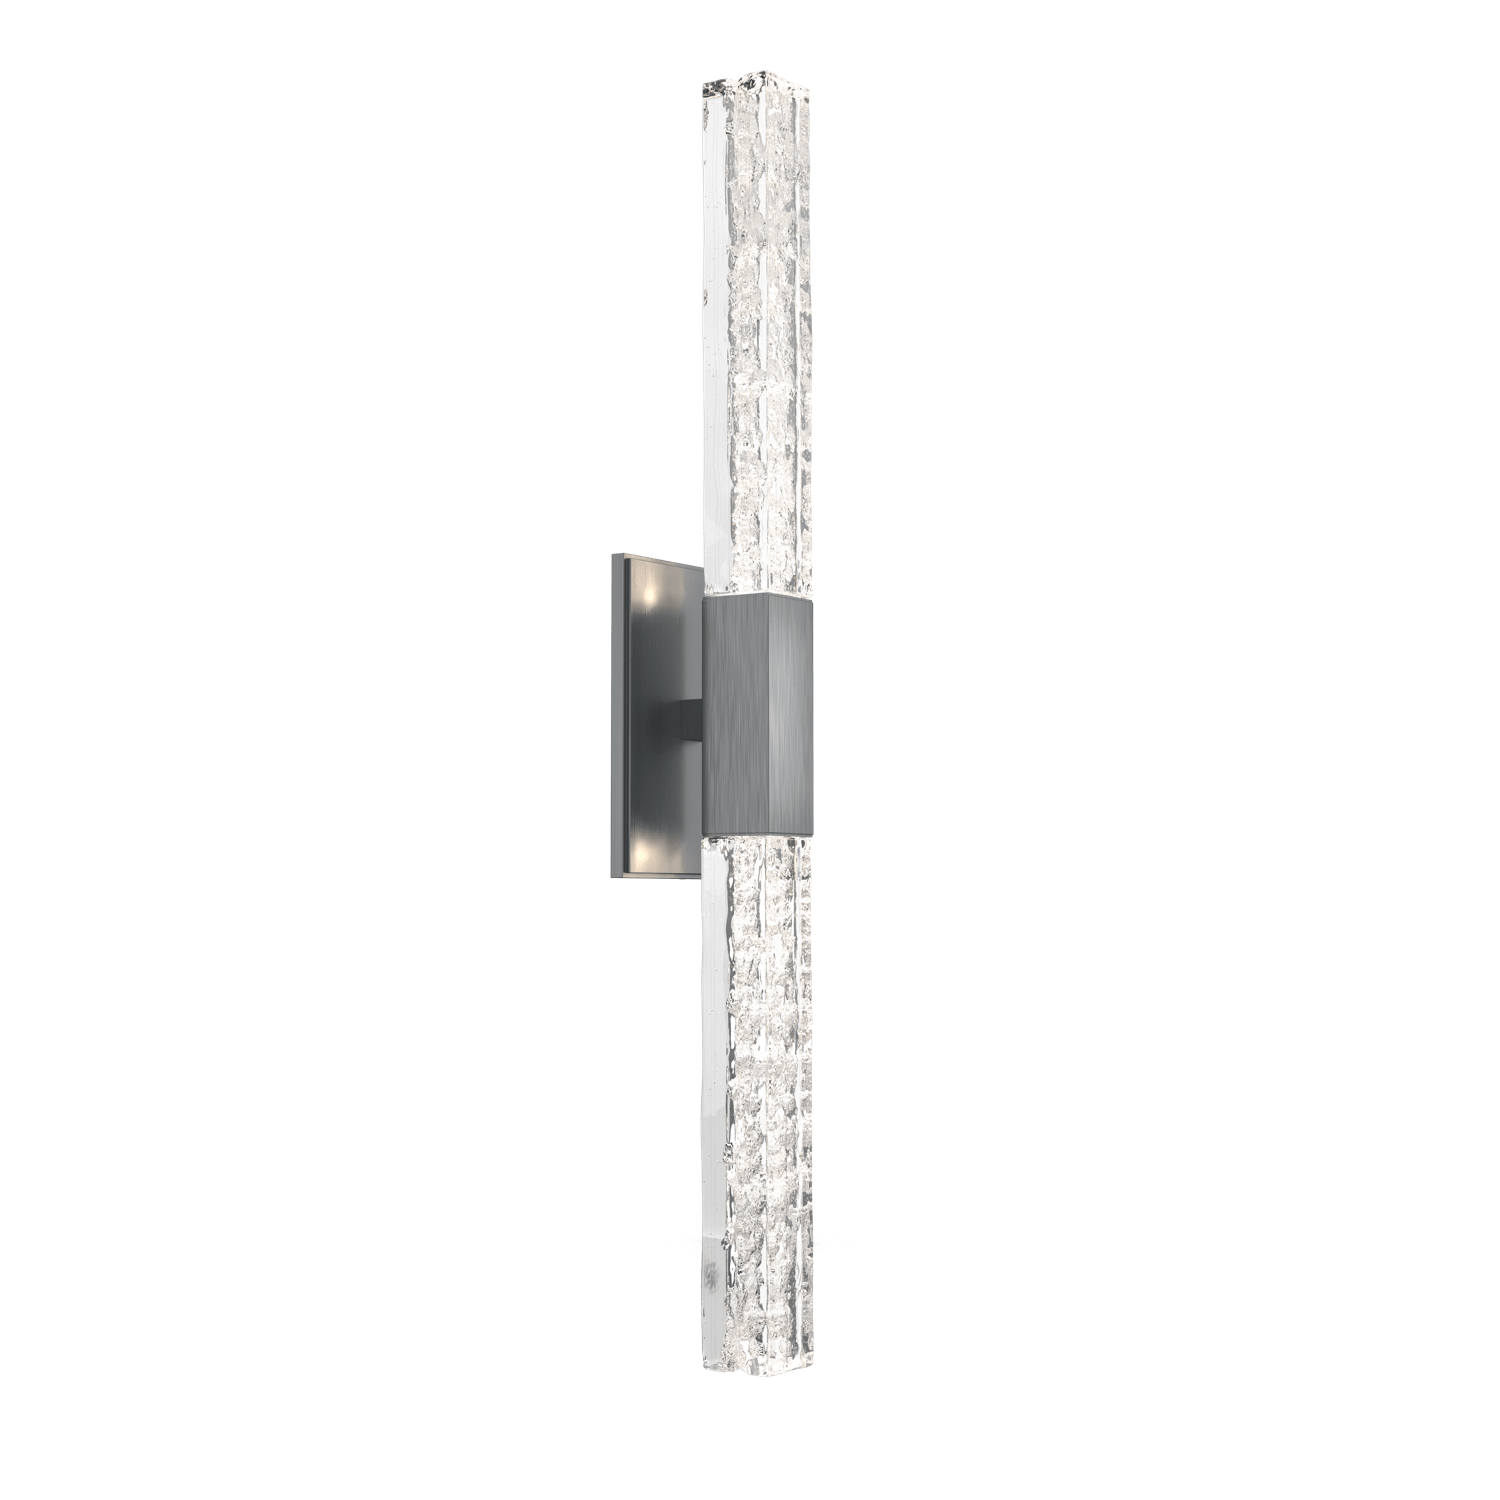 IDB0060-02-SN-GC-Hammerton-Studio-Axis-Double-Wall-Sconce-with-Satin-Nickel-finish-and-clear-cast-glass-and-LED-lamping